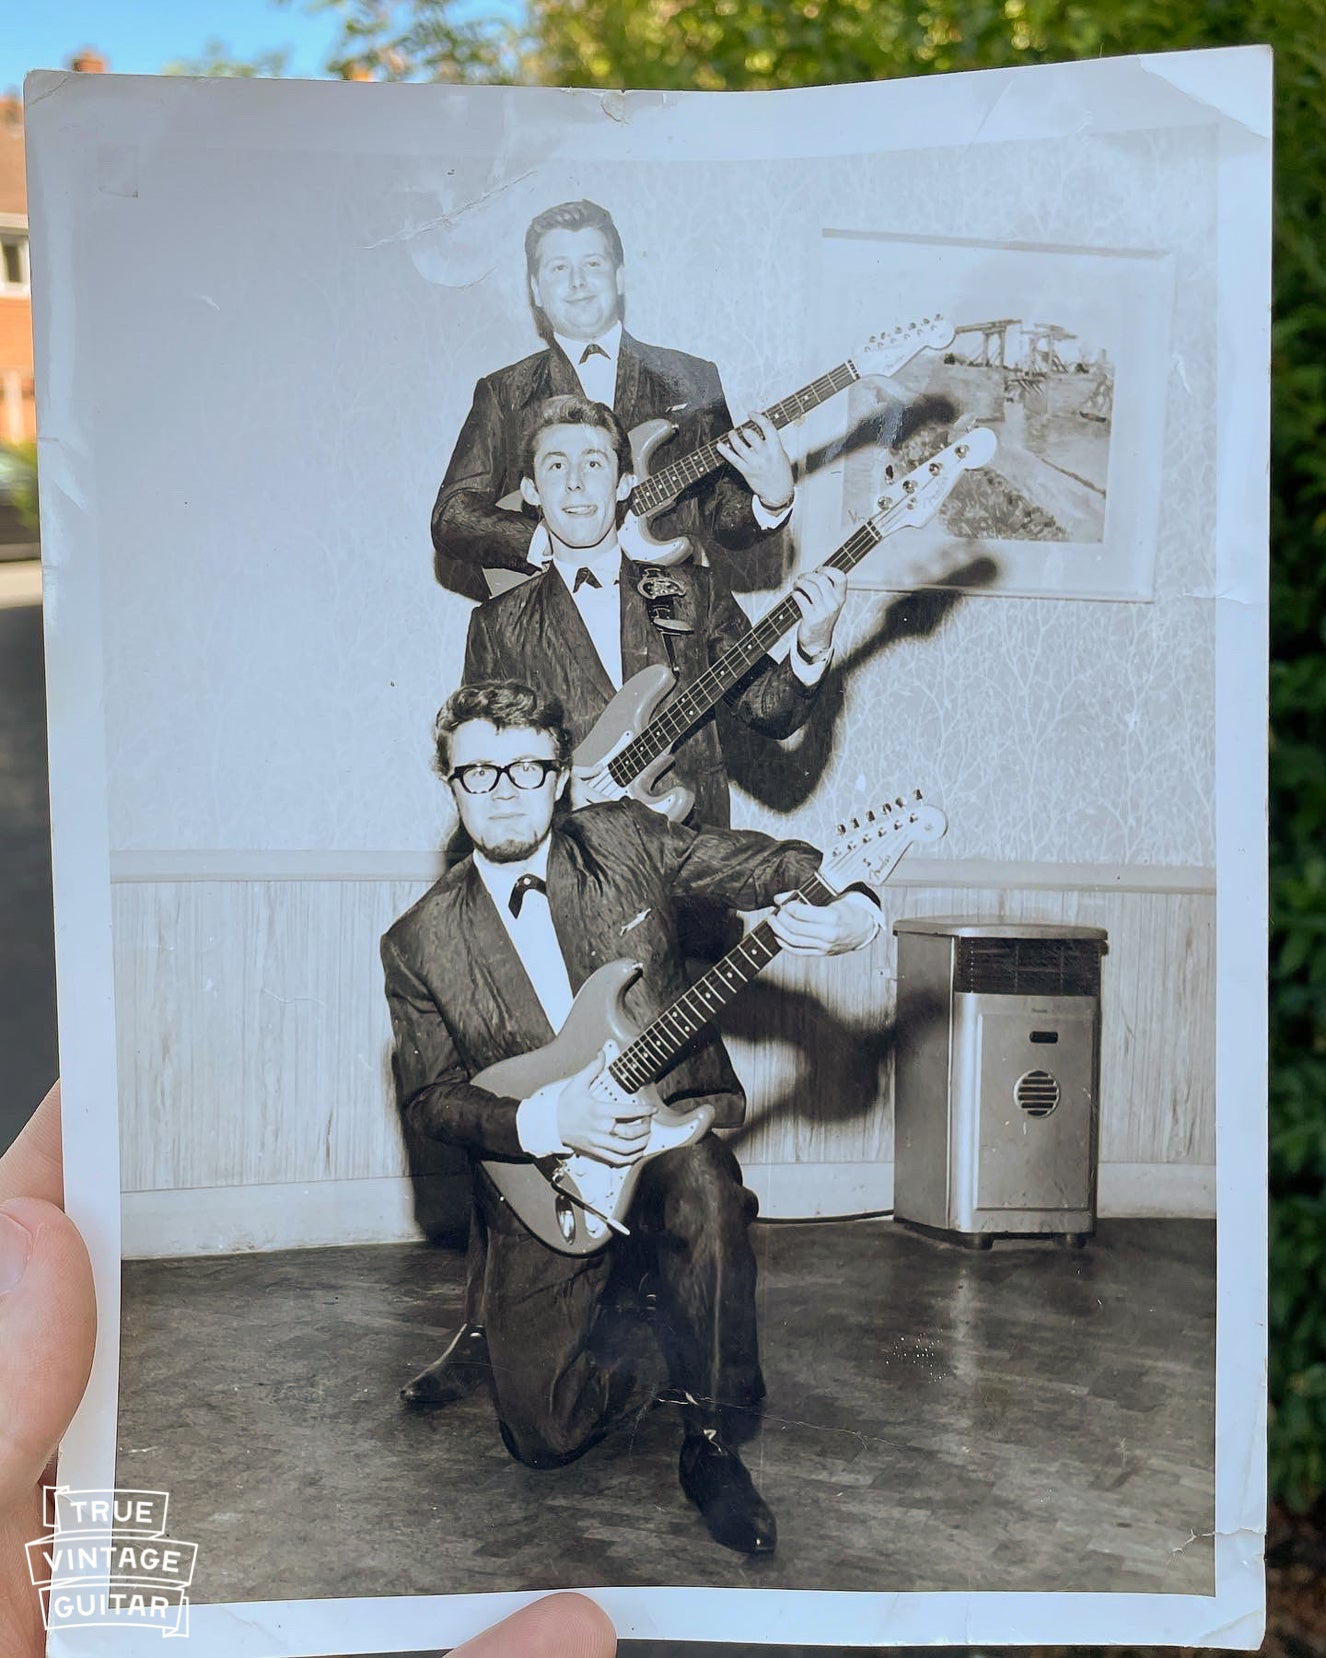 London band in 1962 playing two 1962 Fender Stratocaster guitars and one 1962 Fender Precision Bass in Fiesta Red